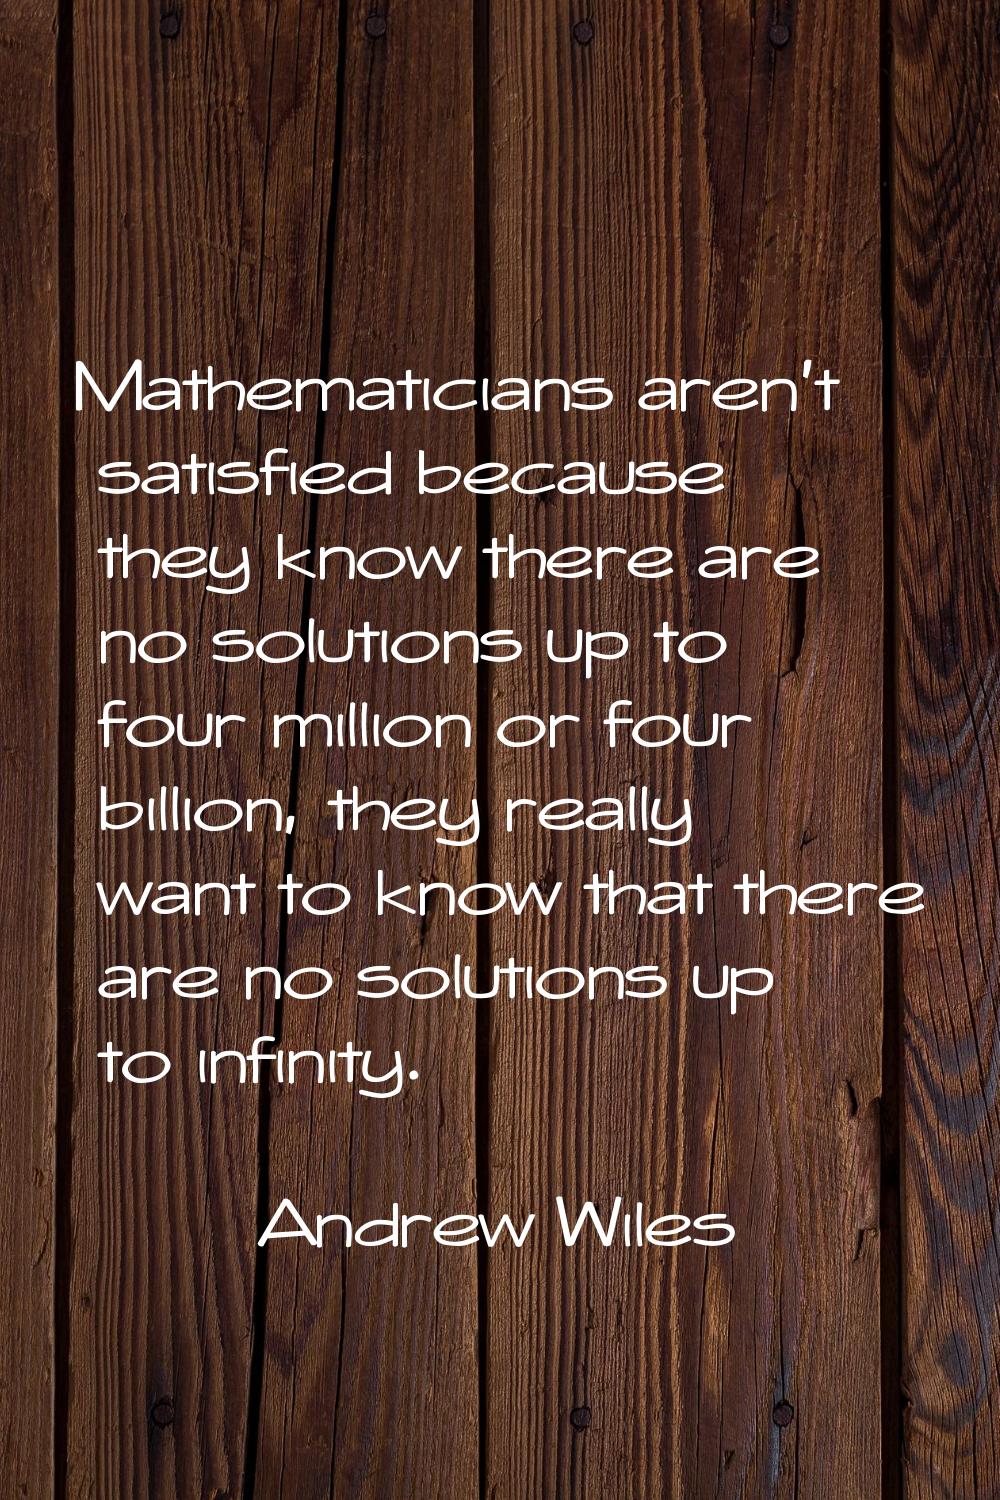 Mathematicians aren't satisfied because they know there are no solutions up to four million or four